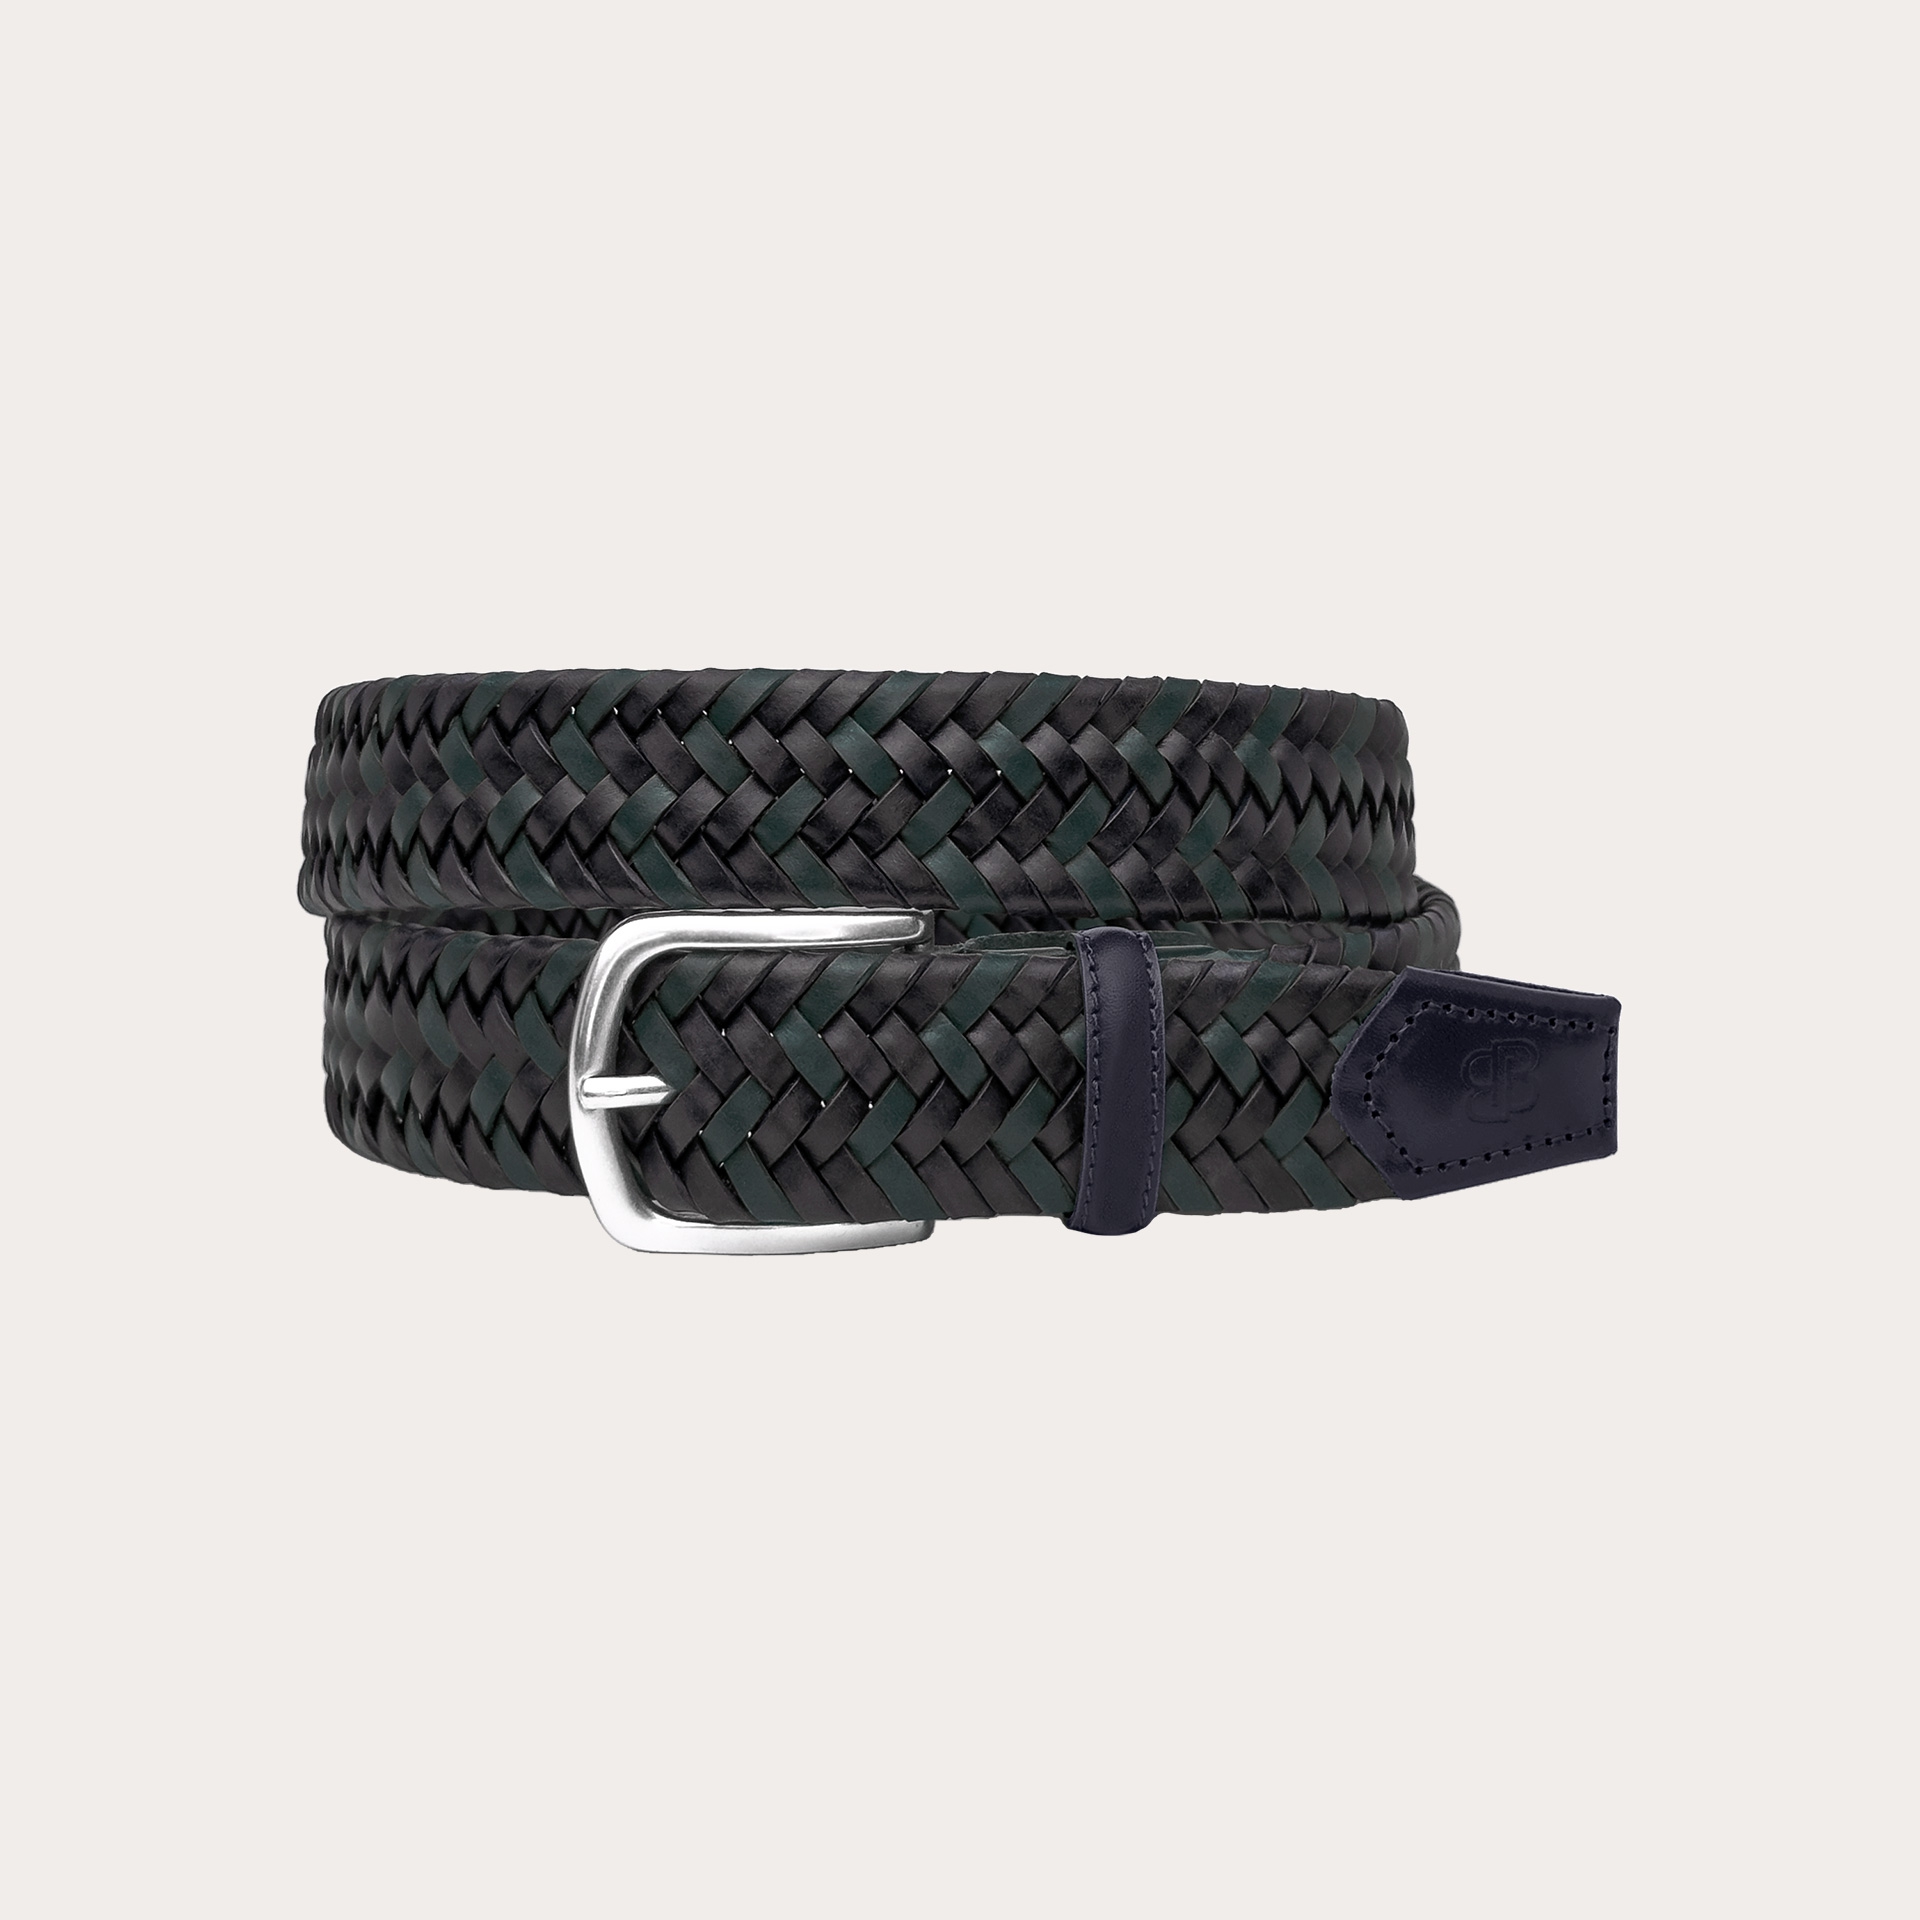 Braided elastic Leather Belt green and blue